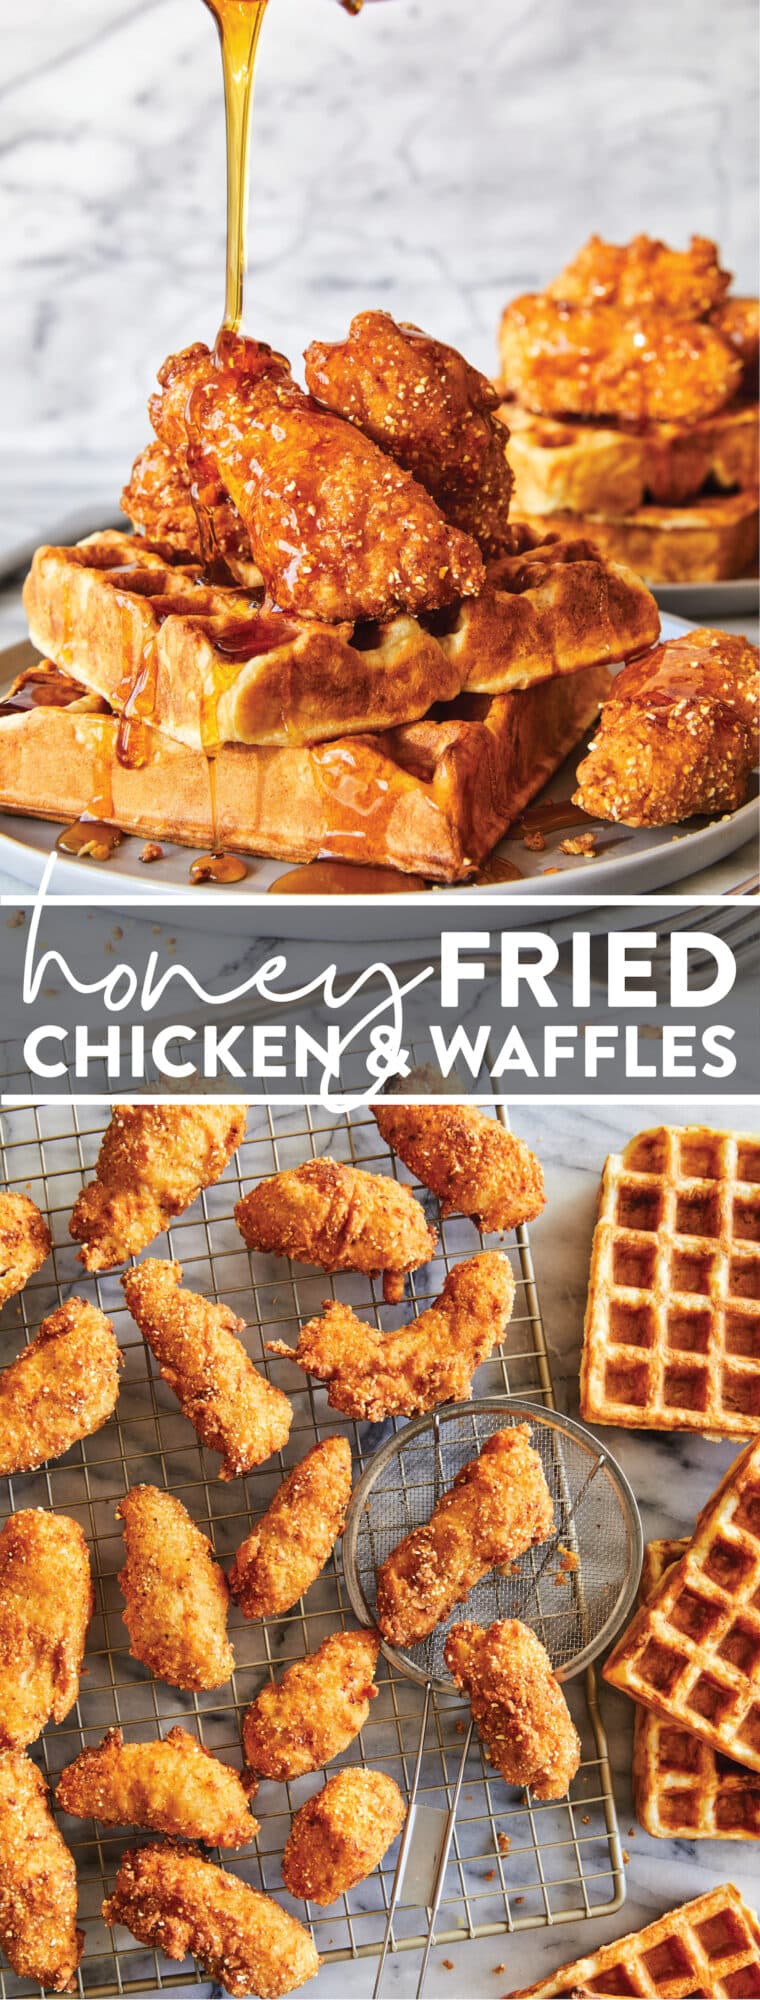 Honey Fried Chicken and Waffles - Super crispy fried chicken, drizzled with a warm honey glaze, served with the fluffiest buttermilk waffles!